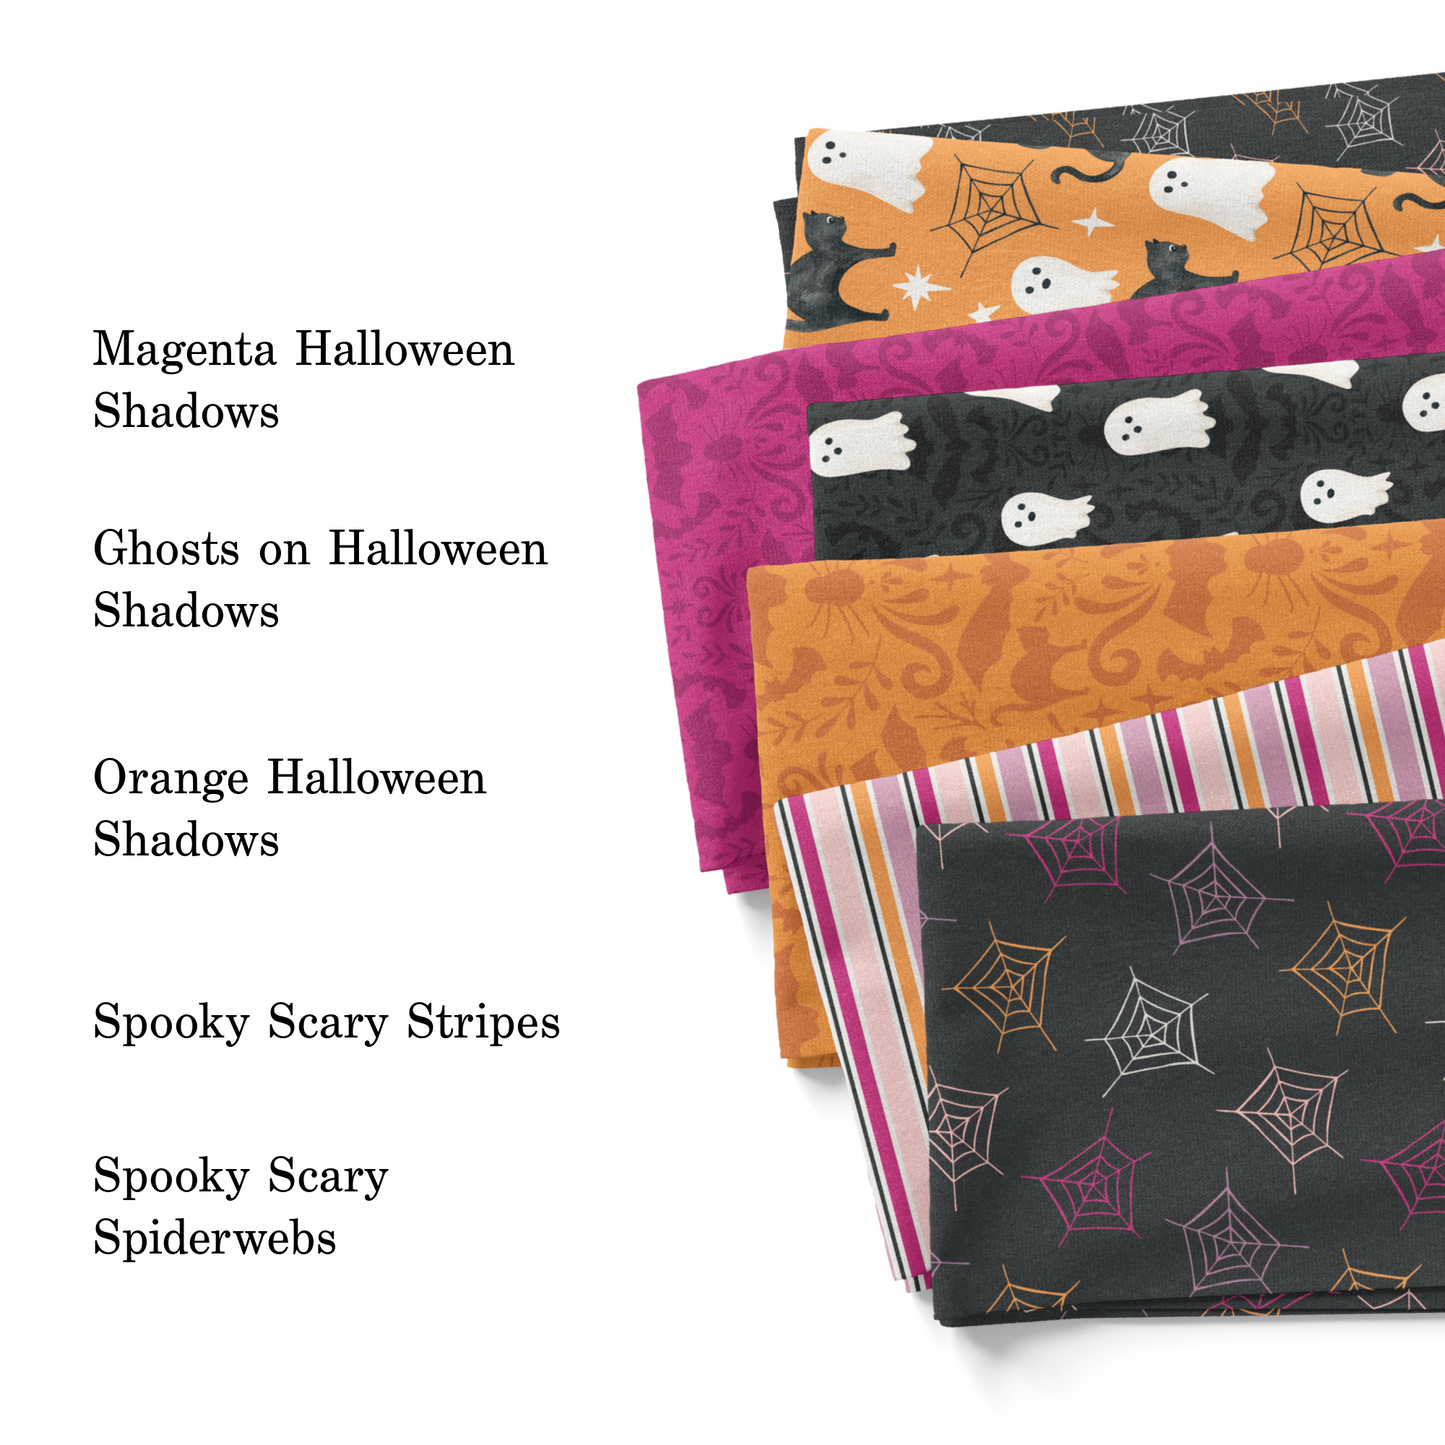 Spooky Scary Spiderwebs Fabric By The Yard